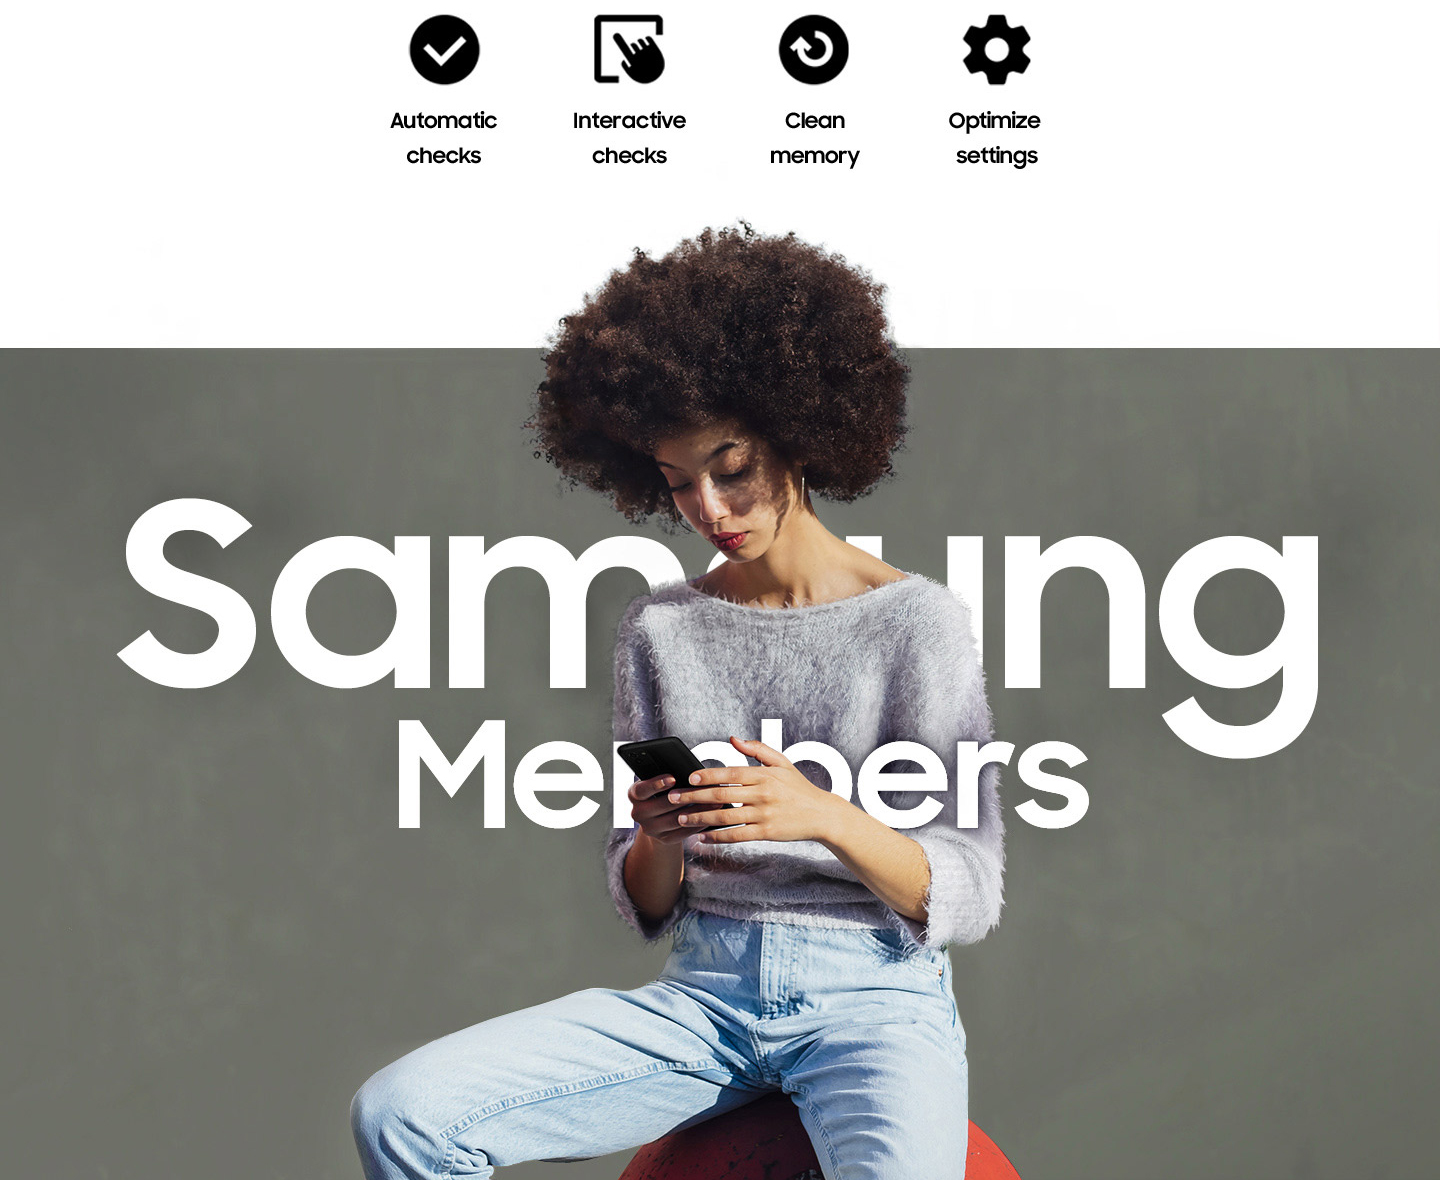 A woman sitting outside and using her phone. Text saying Samsung Members is written across her. Automatic checks, Interactive checks, Clean memory and Optimize settings.